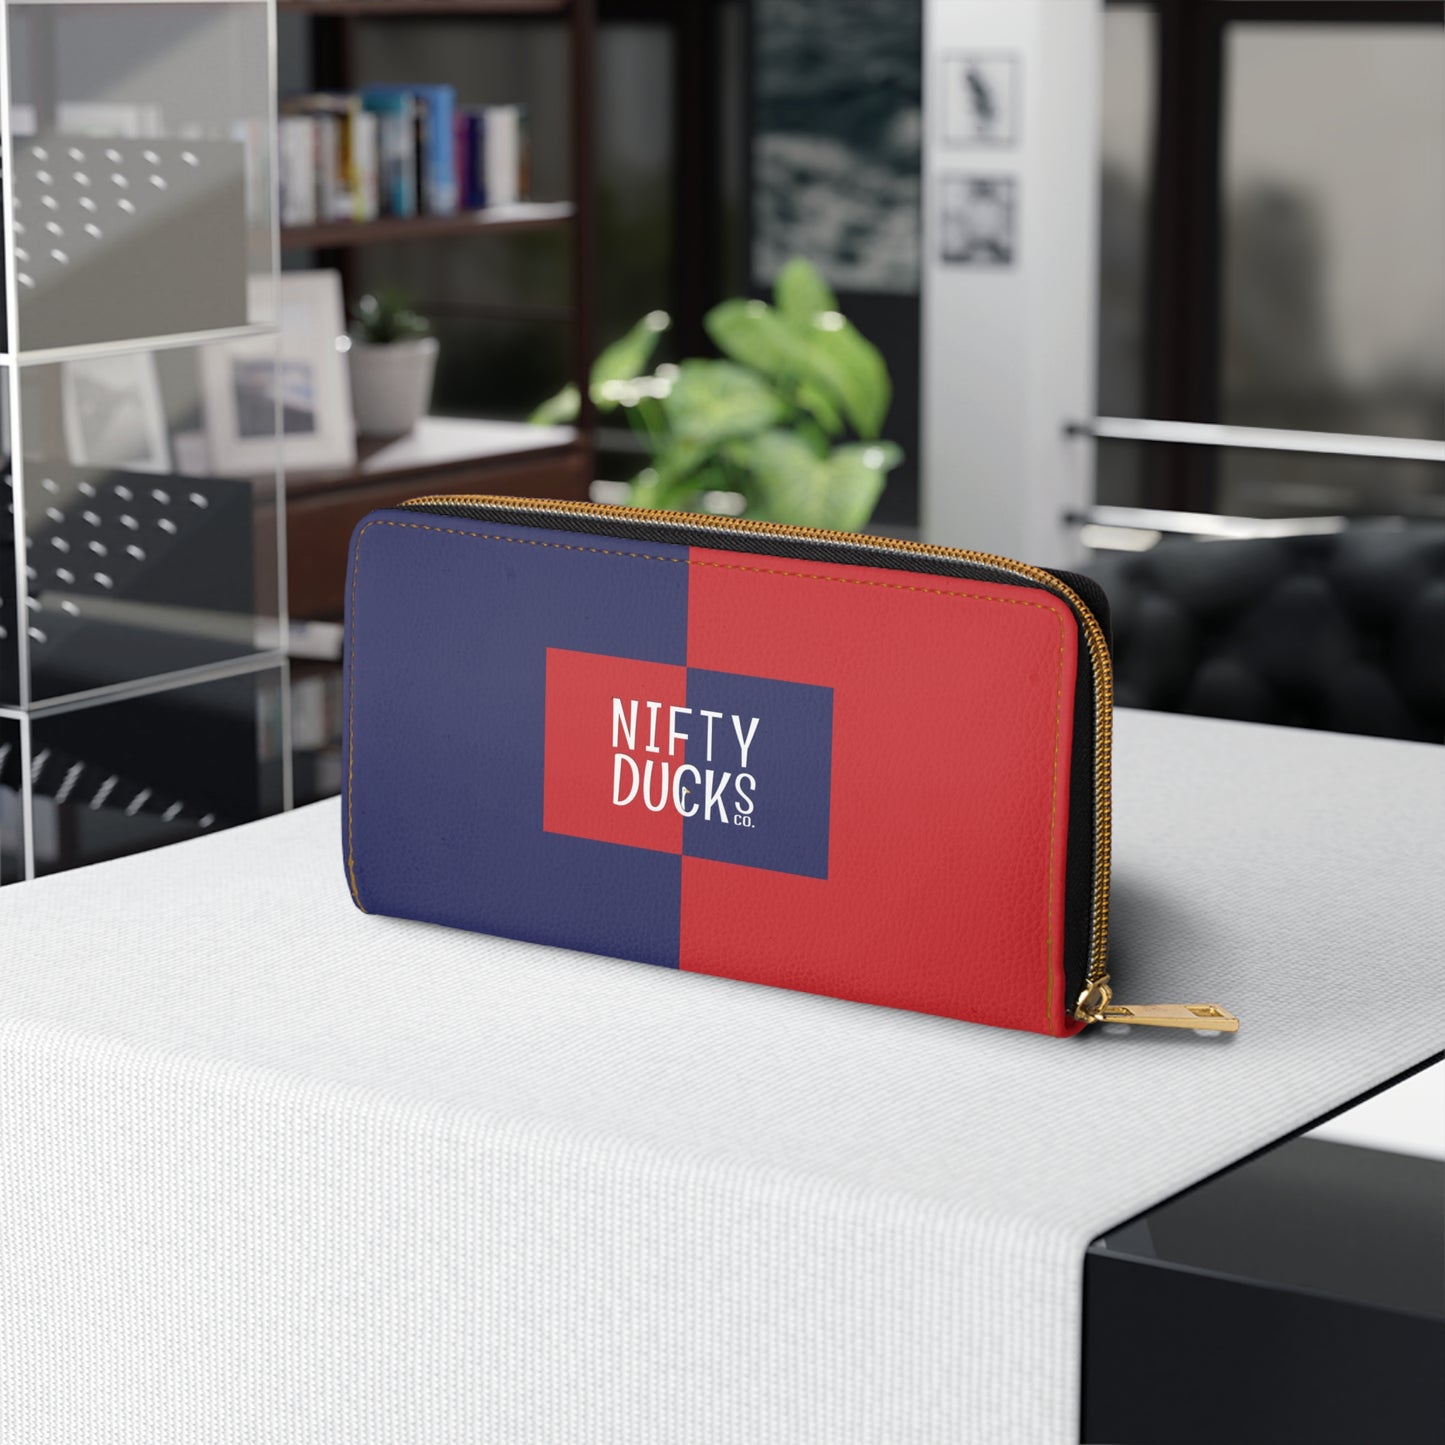 Charlotte - Red White and Blue City series - Zipper Wallet